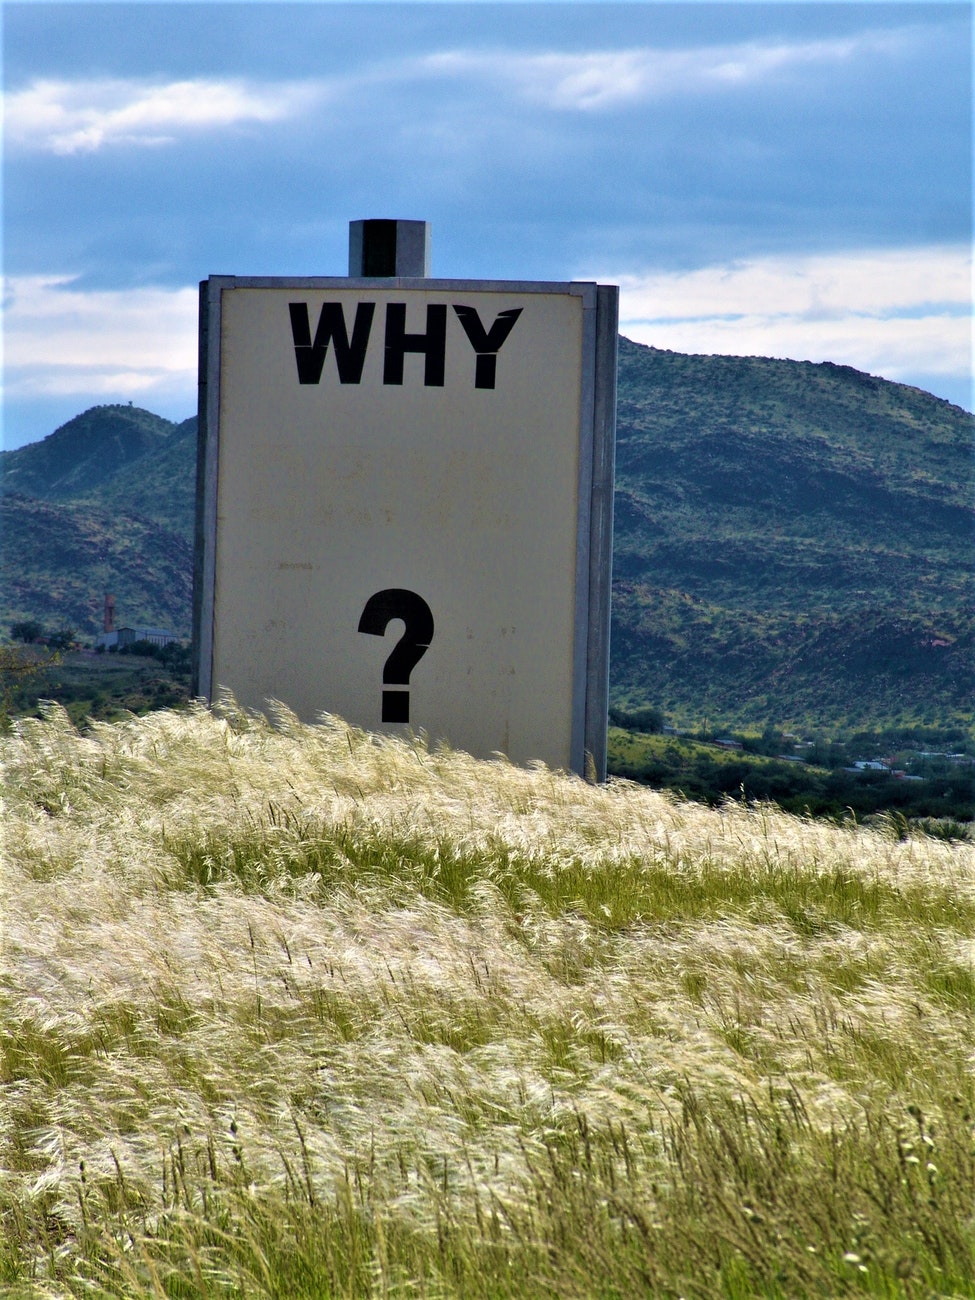 Have A Difficult Problem? Understand The Root Cause with 5 Whys Approach - used by Toyota Motor